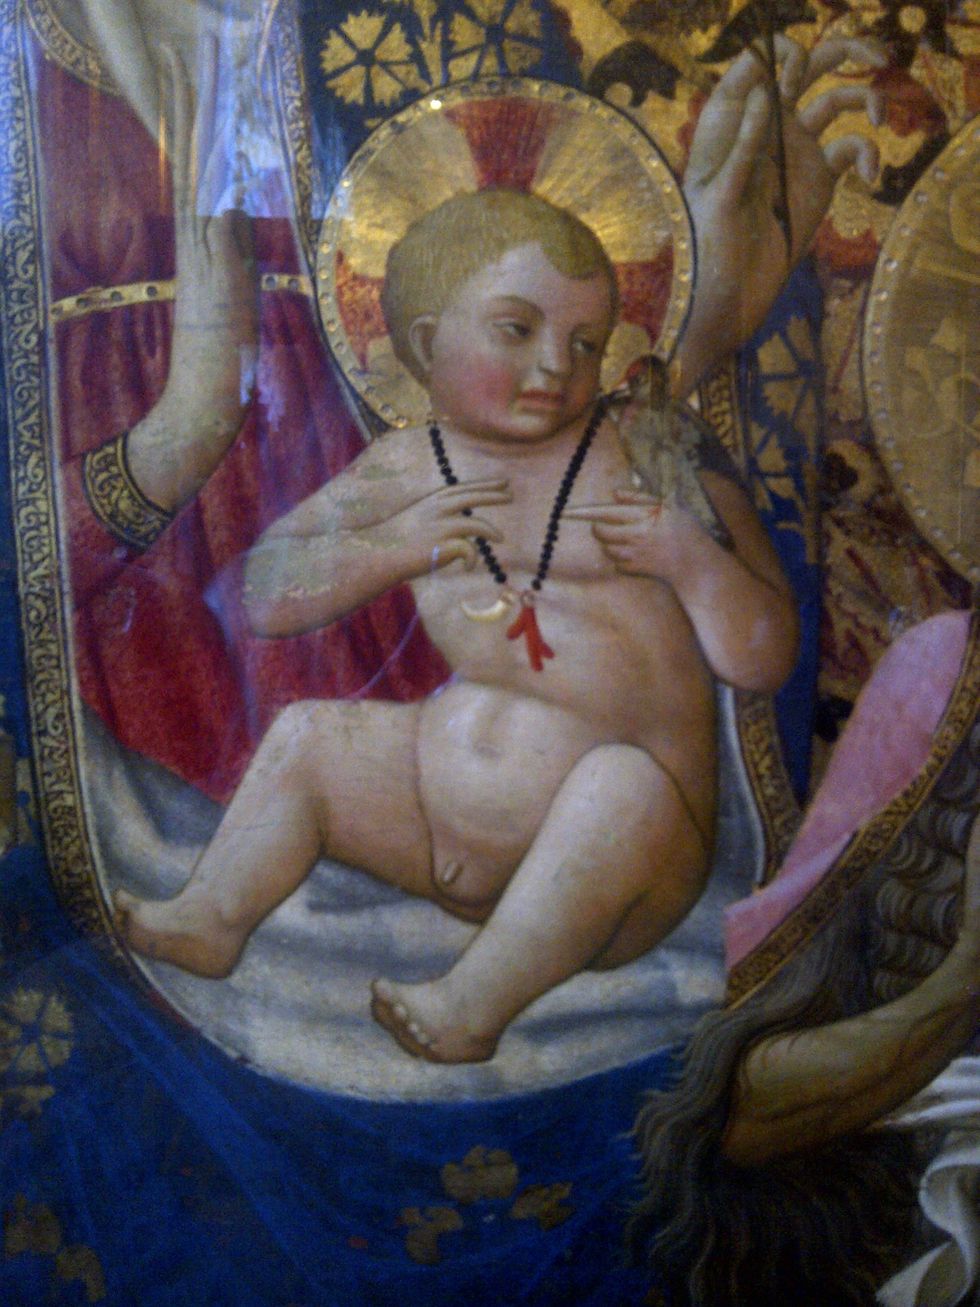 10 Hilariously Hideous Renaissance Baby Paintings